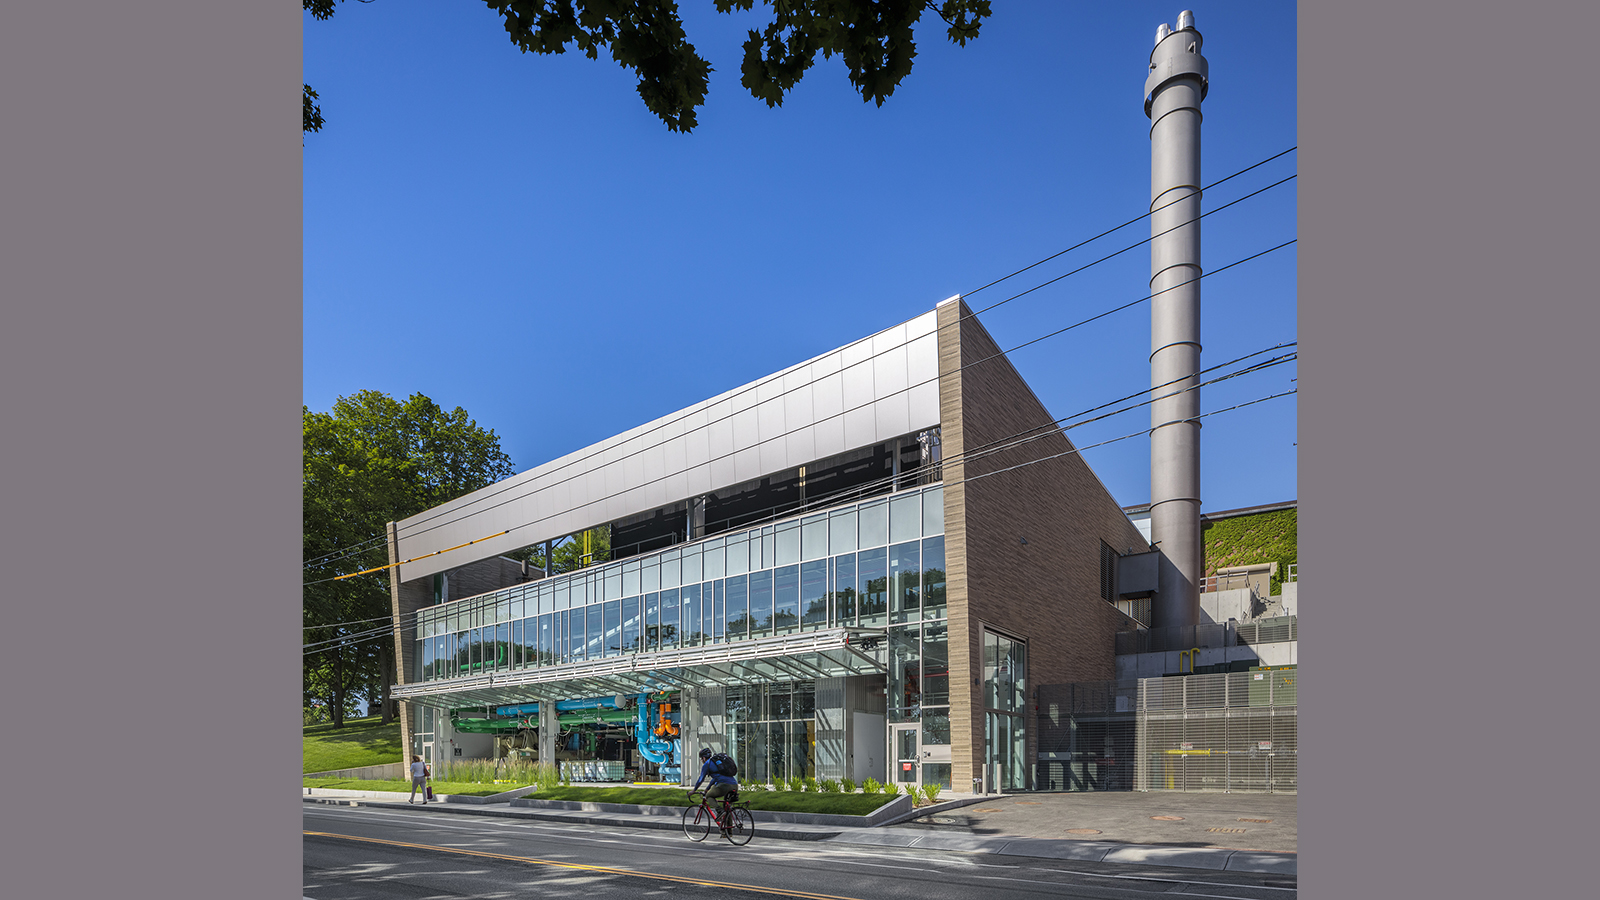 Tufts University Central Energy Plant Exterior